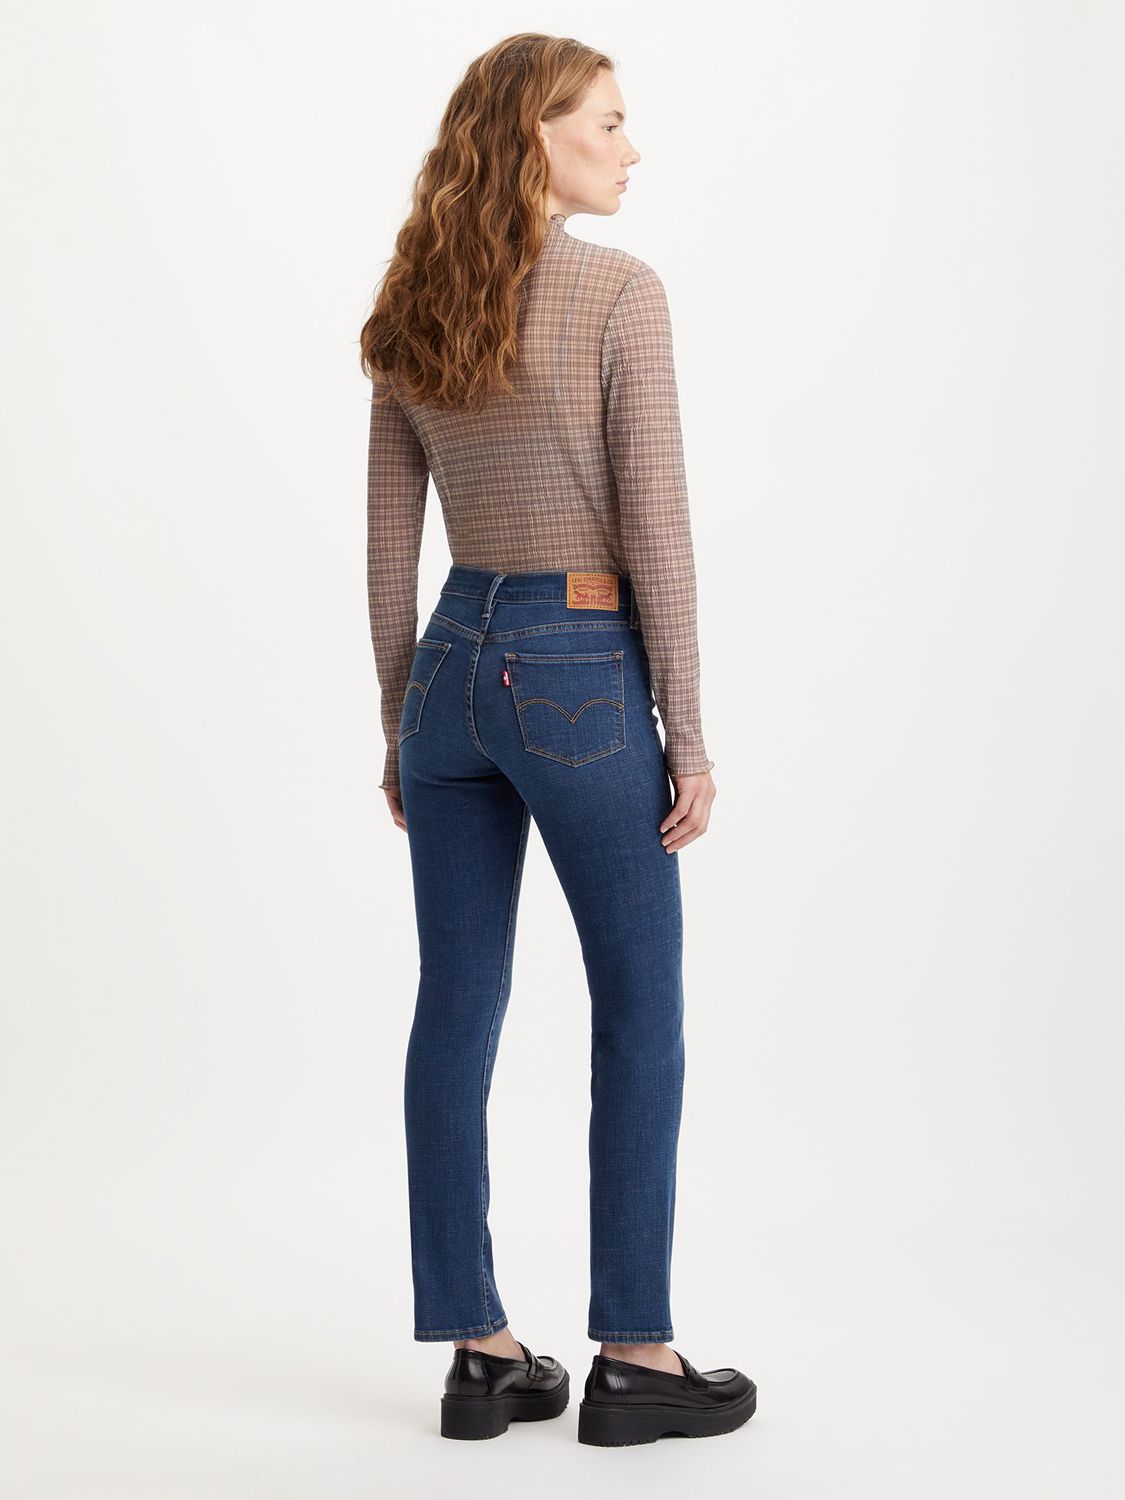 Levi's 312 Shaping Slim Jeans, Salty Surf at John Lewis & Partners